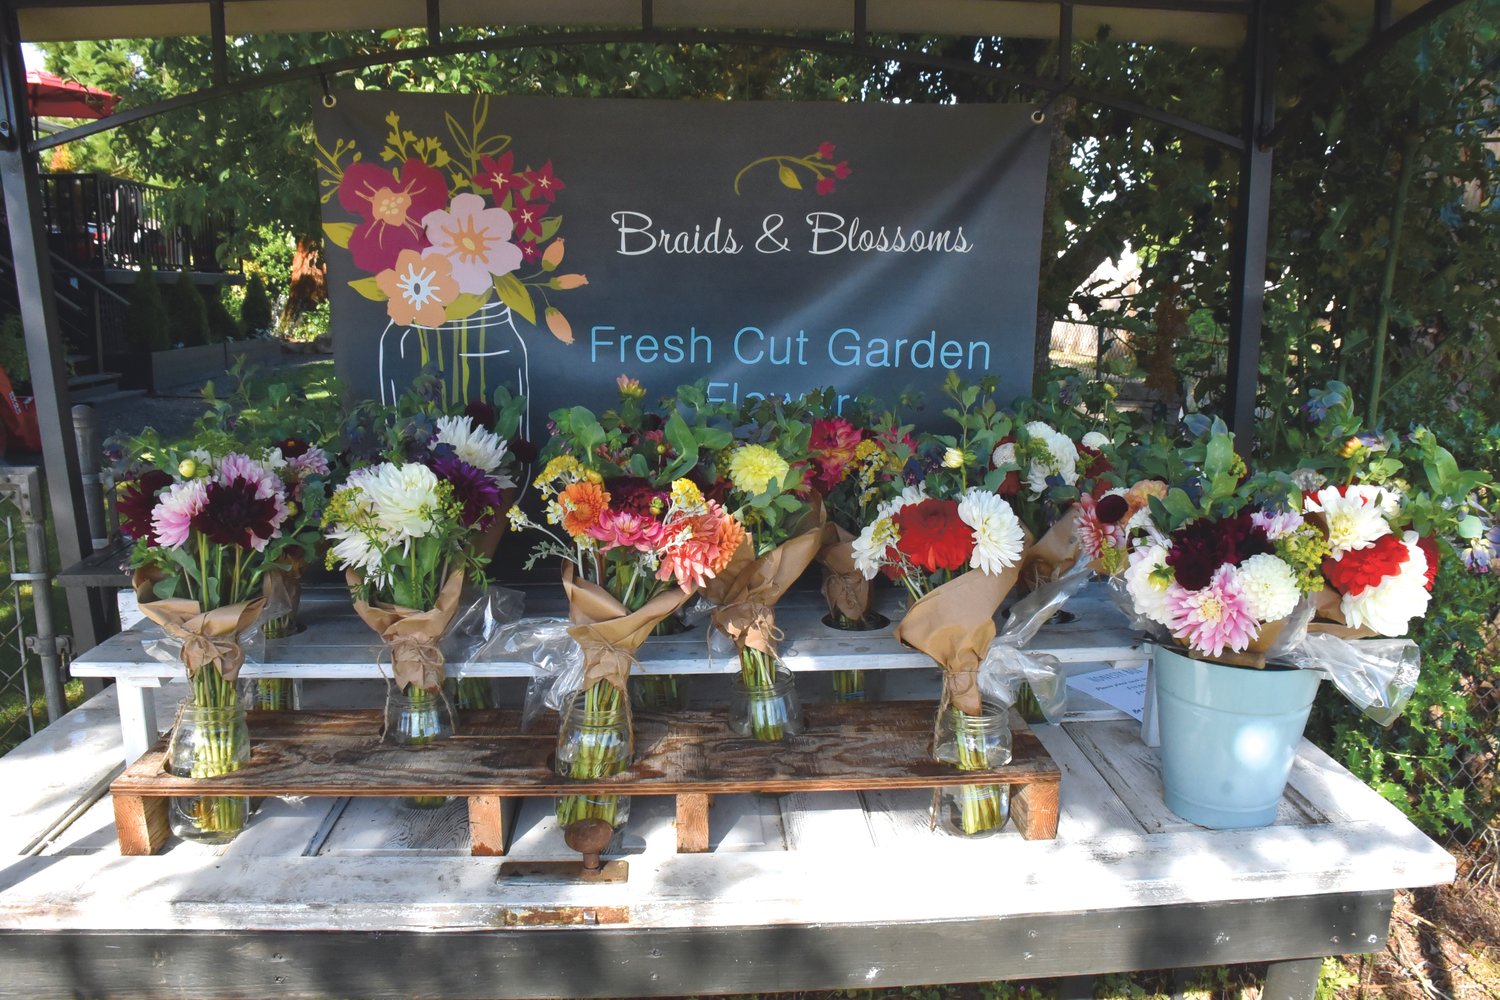 The Braids and Blossoms Flower Farm has bouquets for sale every Friday at 9 a.m. during the summer at 396 Sussex Ave. E. in Tenino.